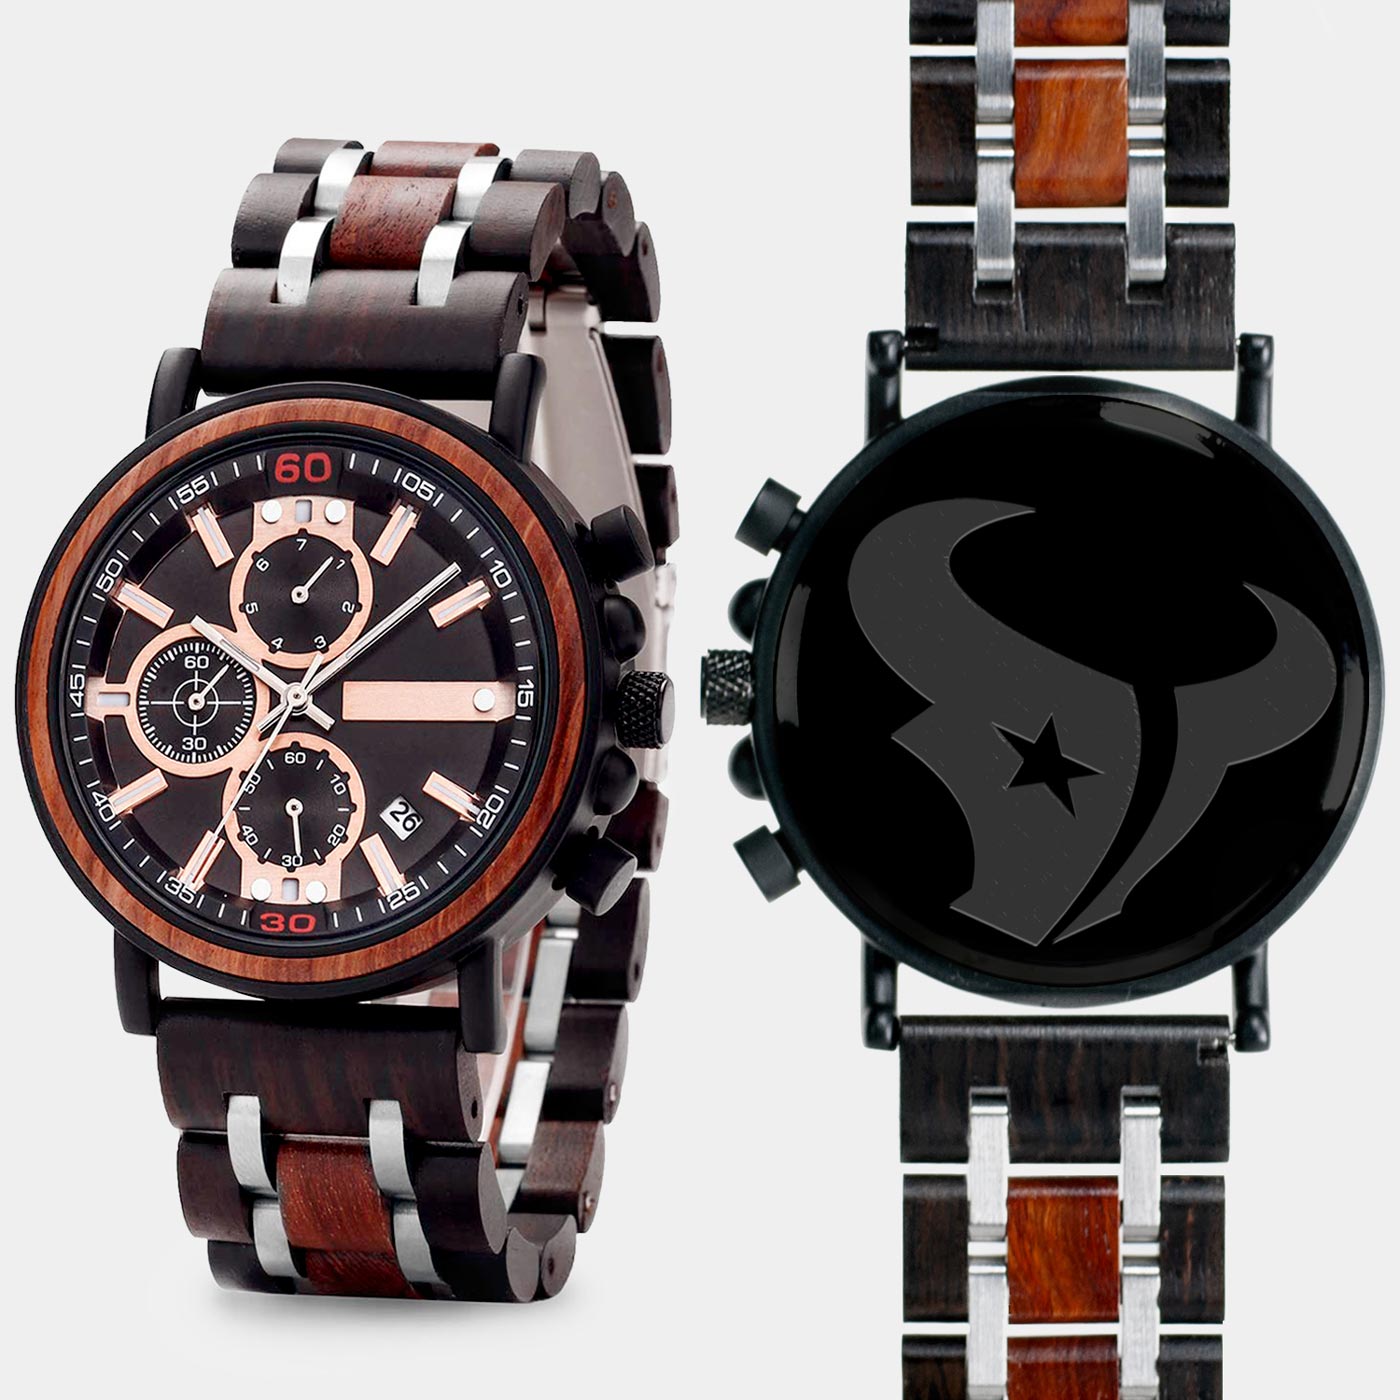 Houston Texans Mens Wrist Watch  - Personalized Houston Texans Mens Watches - Custom Gifts For Him, Birthday Gifts, Gift For Dad - Best 2022 Houston Texans Christmas Gifts - Black 45mm NFL Wood Watch